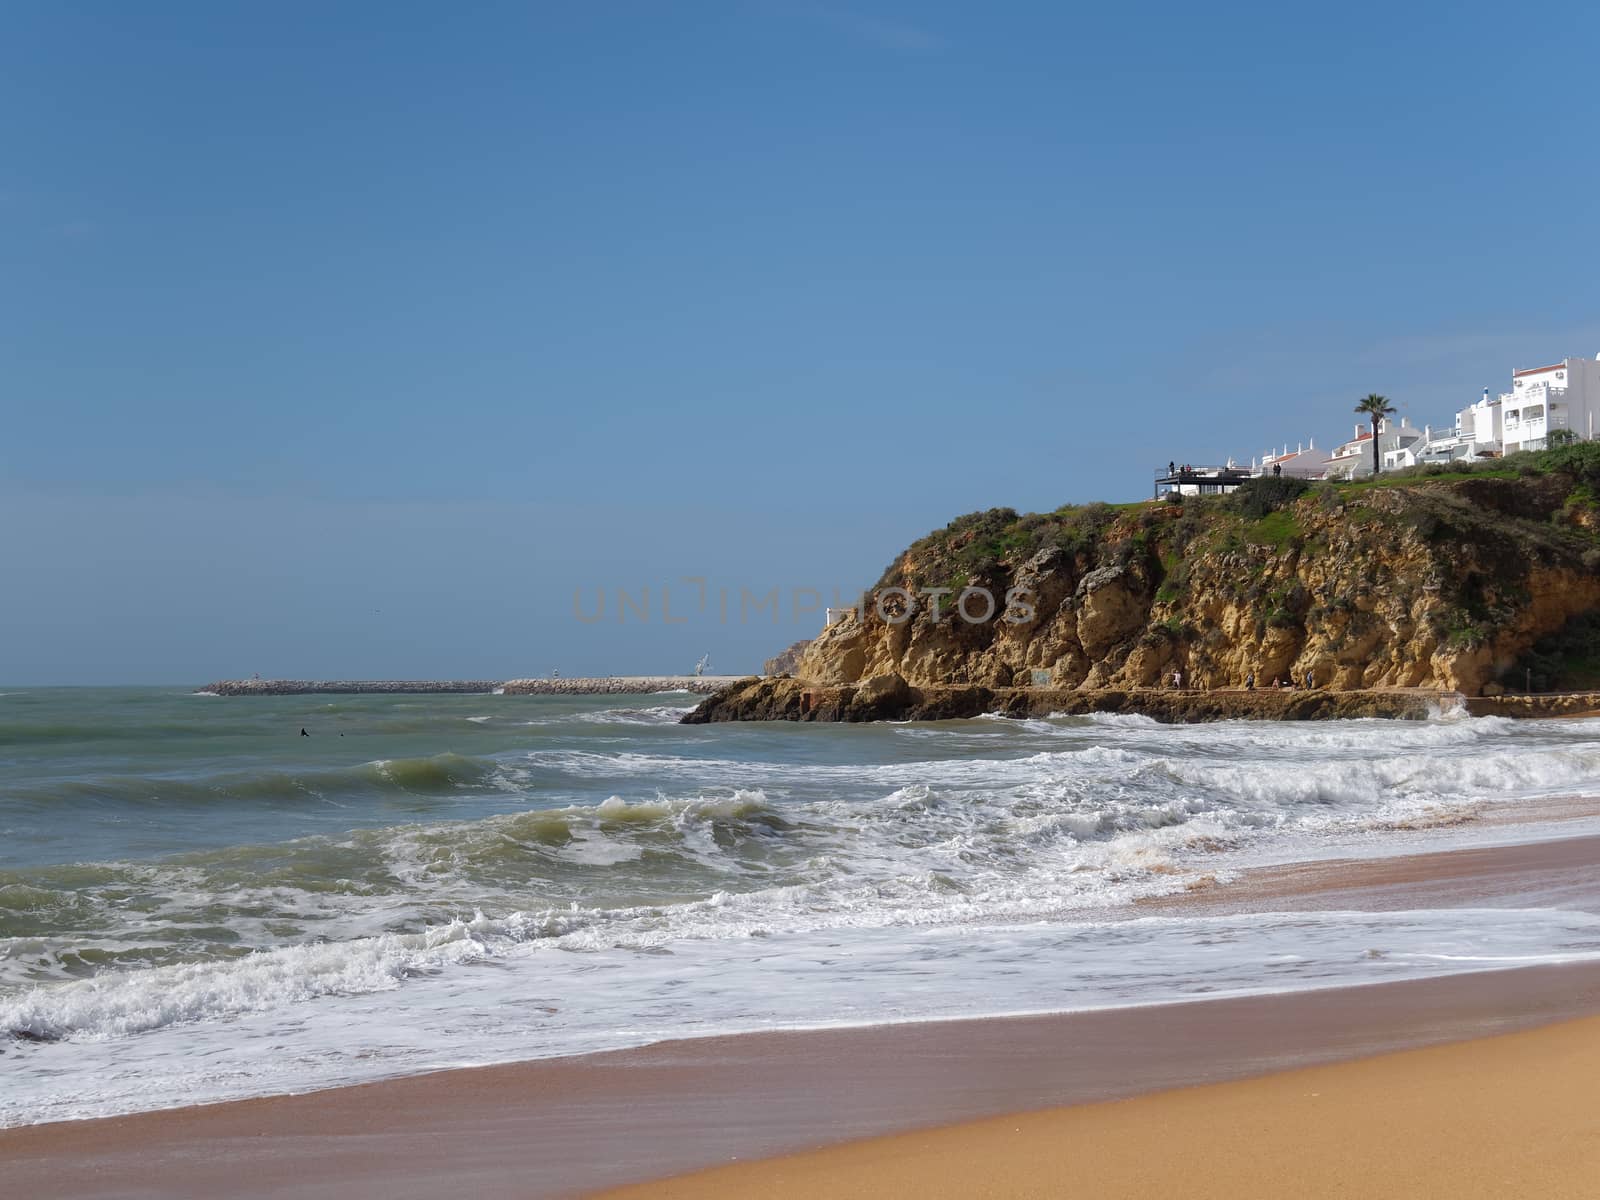 ALBUFEIRA, SOUTHERN ALGARVE/PORTUGAL - MARCH 10 : View of the Be by phil_bird